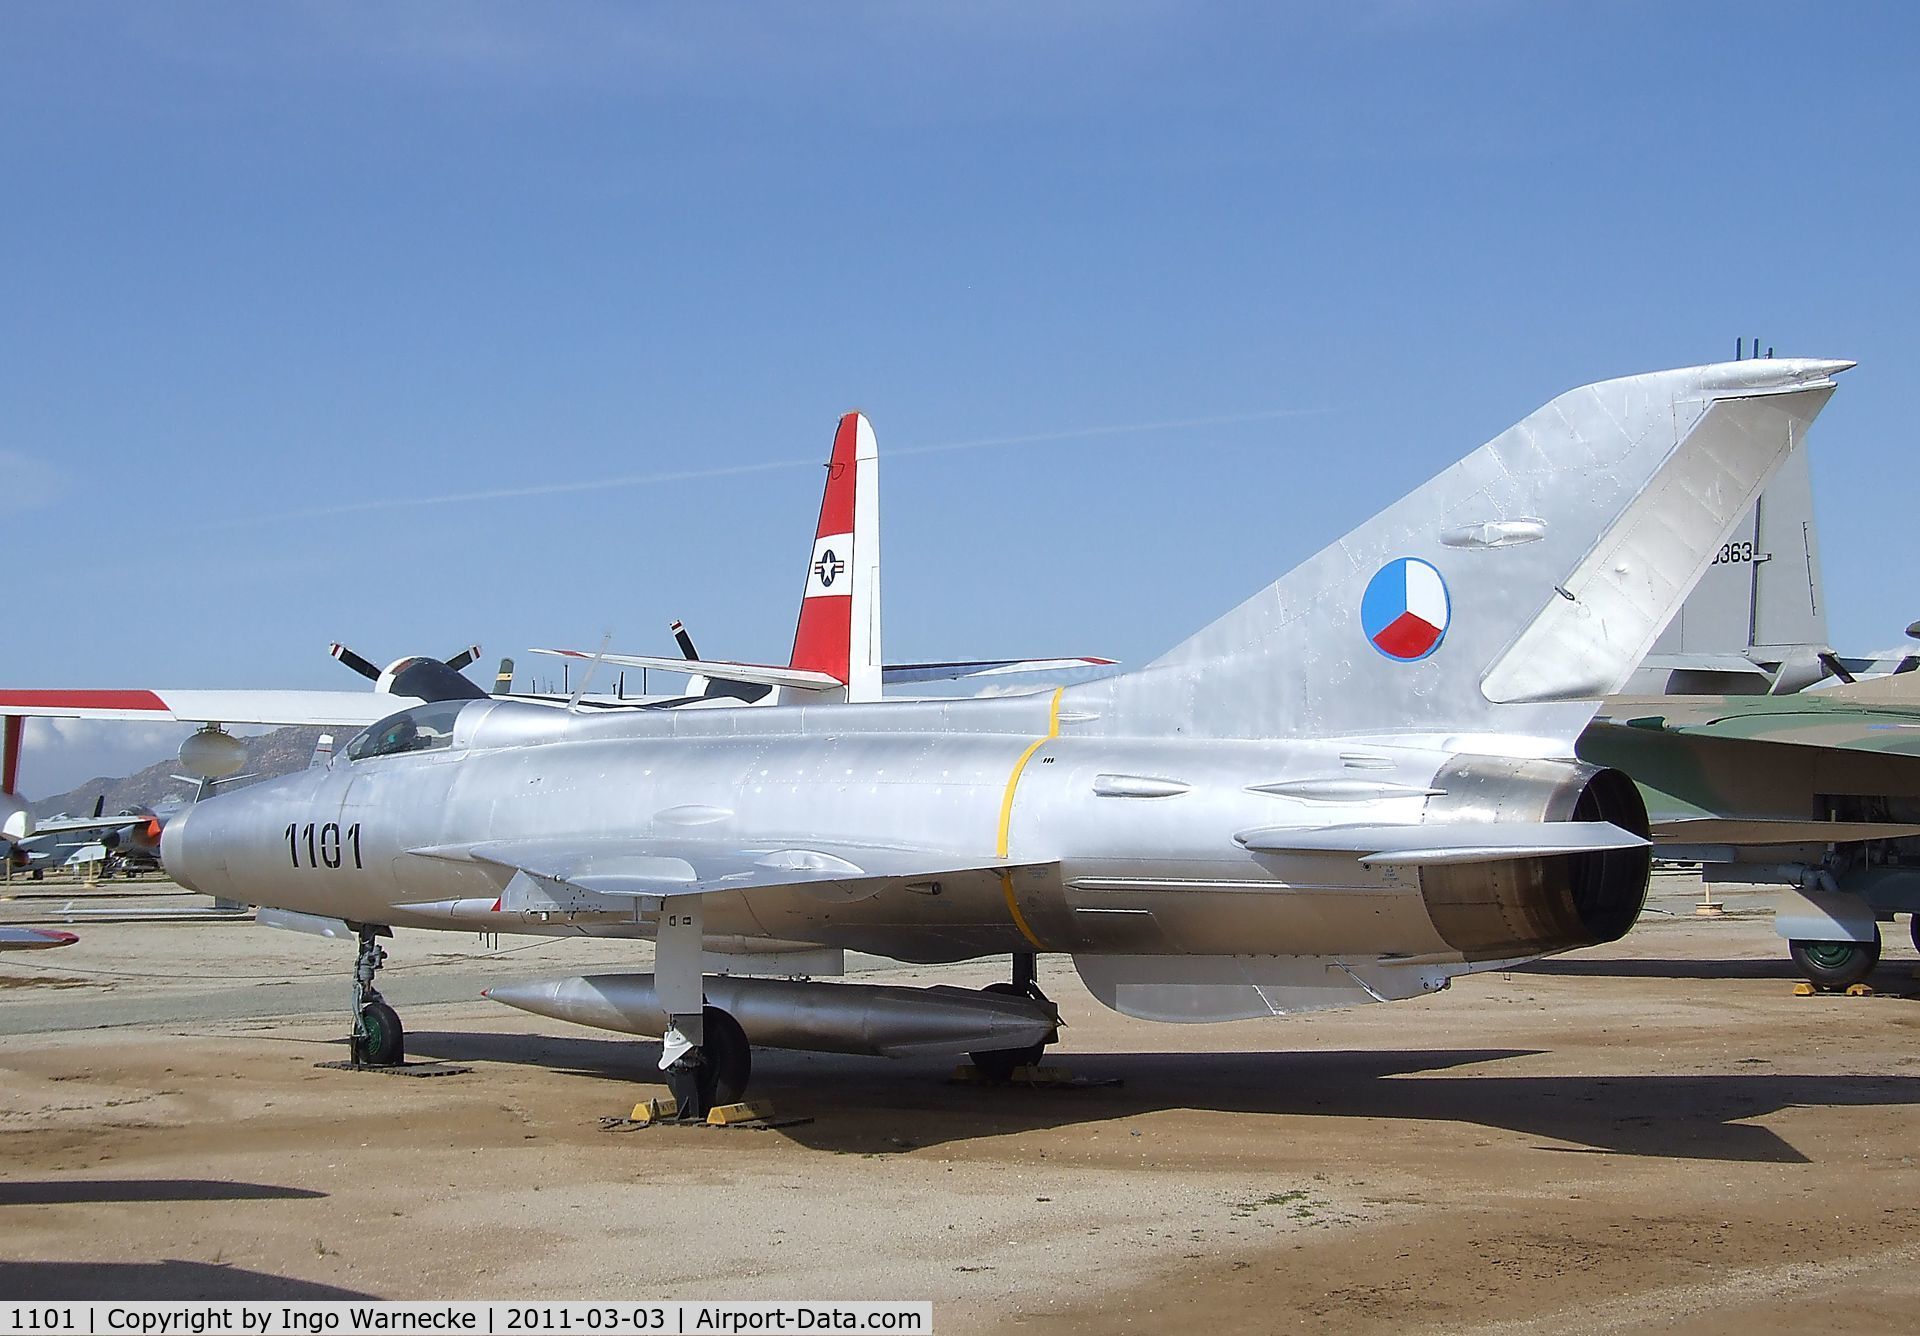 1101, Mikoyan-Gurevich MiG-21F-13 C/N 161101, Mikoyan i Gurevich MiG-21F-13 FISHBED-C at the March Field Air Museum, Riverside CA